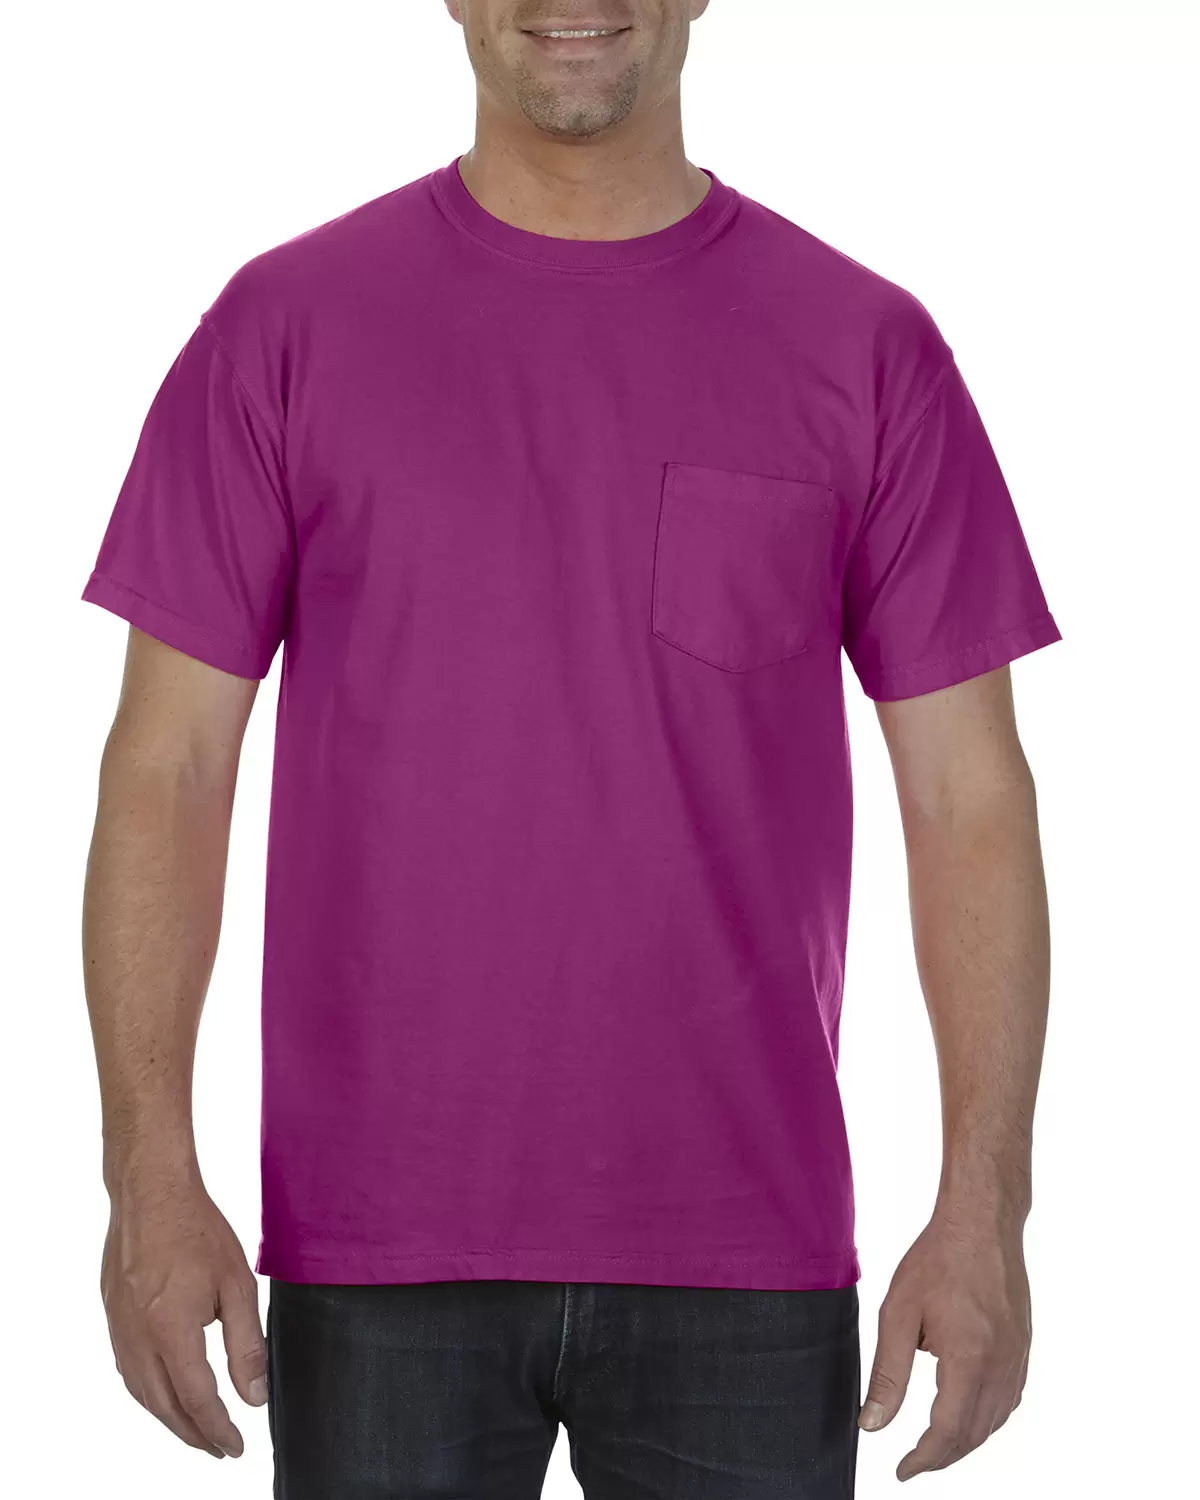 Comfort Colors Pigment Dyed Tee